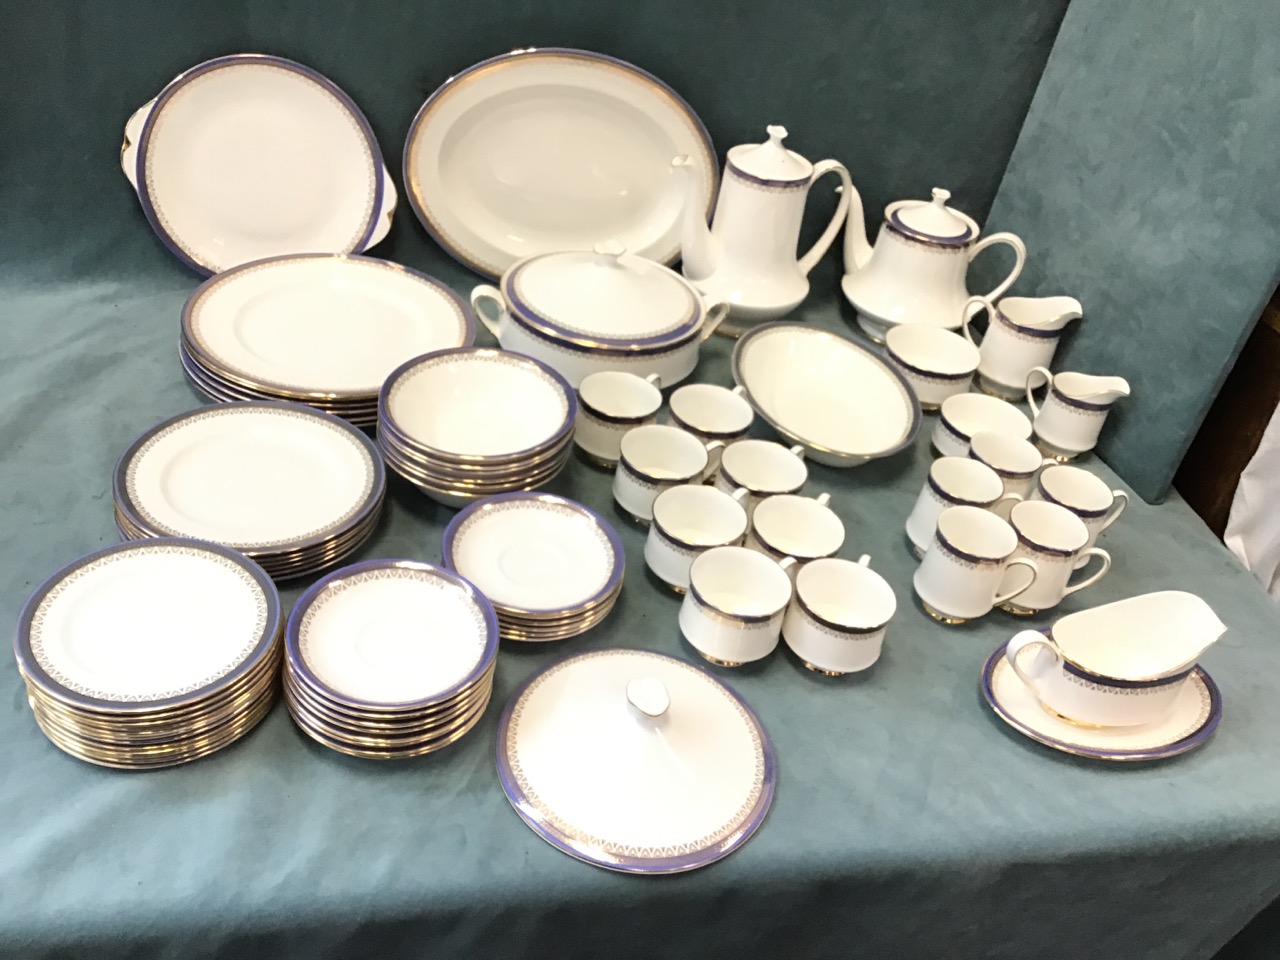 An extensive Paragon porcelain dinner/tea service with blue and gilt borders in the Sandringham